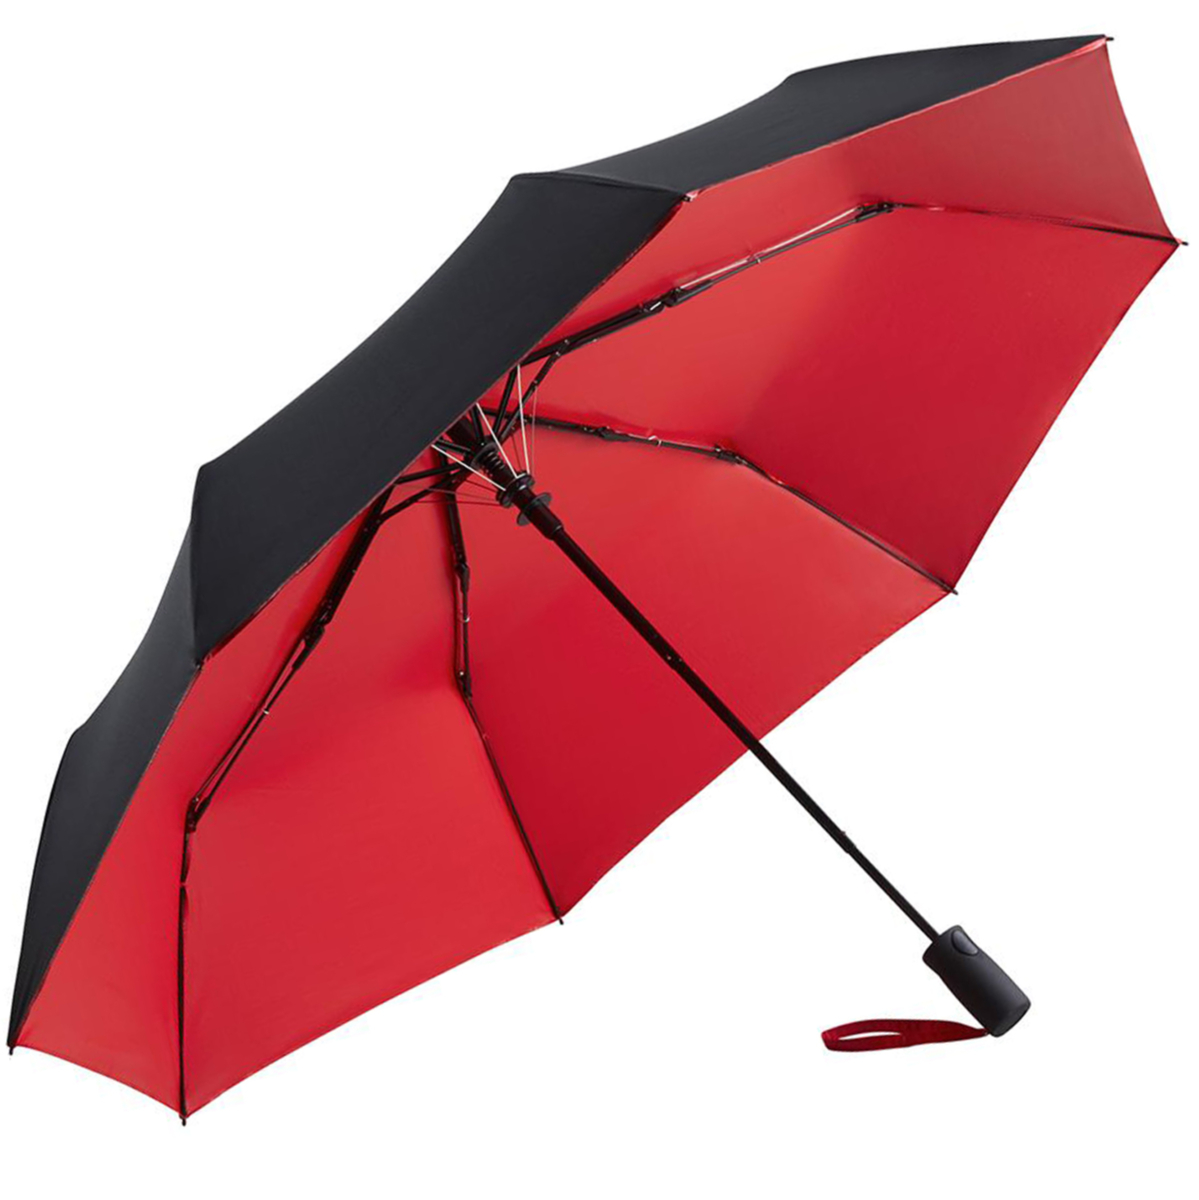 Two-Tone Automatic Opening Folding Umbrella - Black & Red